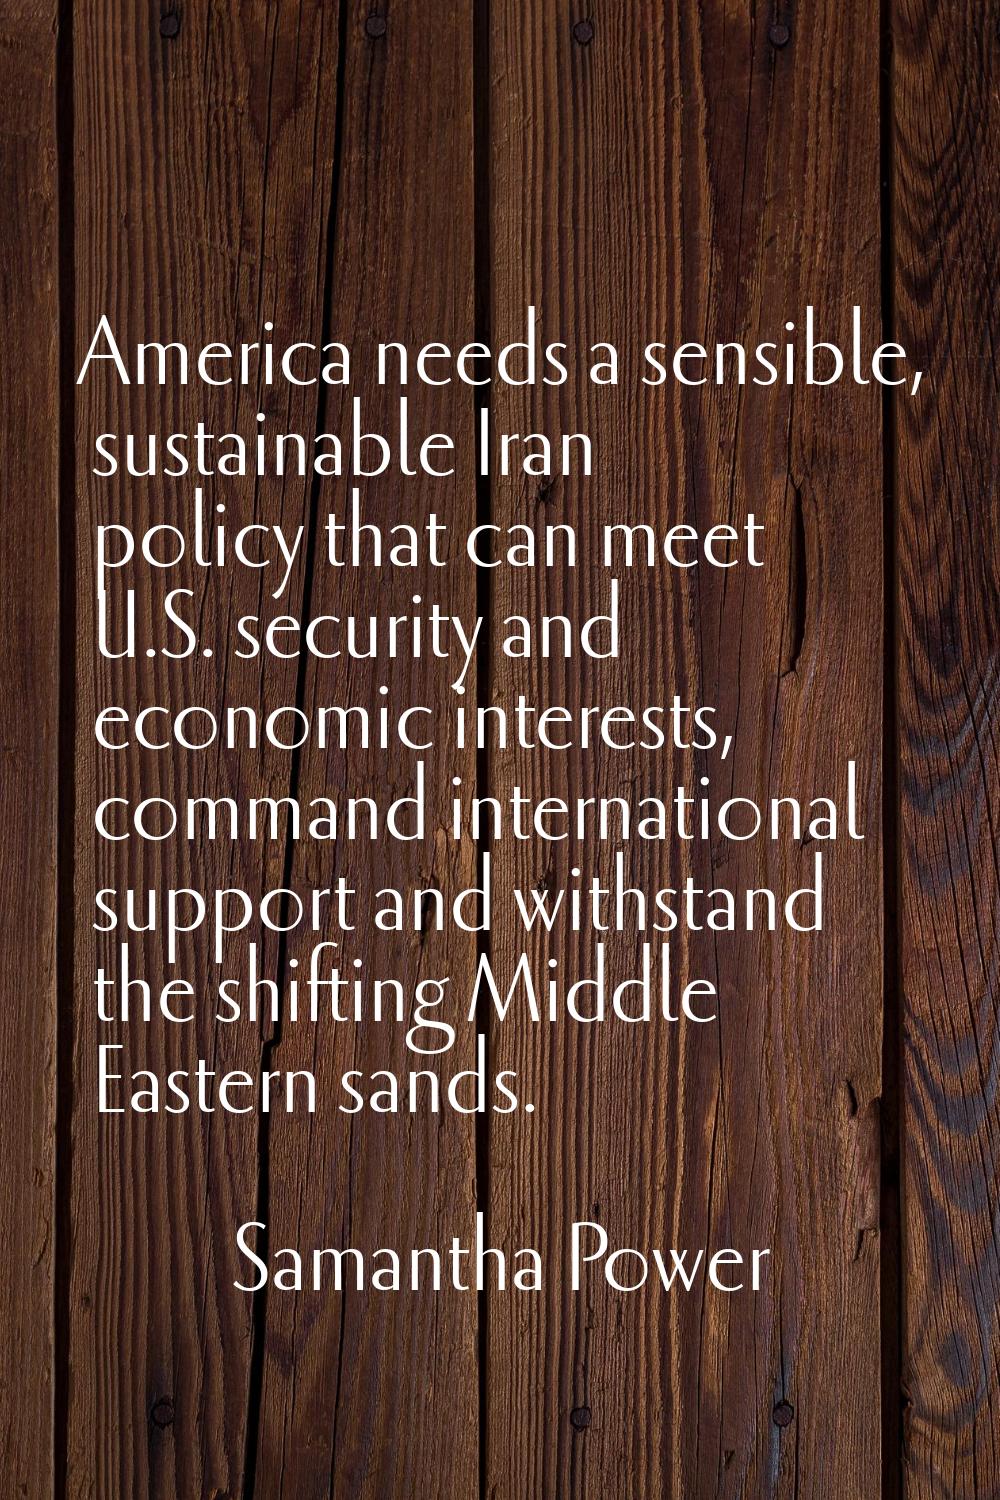 America needs a sensible, sustainable Iran policy that can meet U.S. security and economic interest